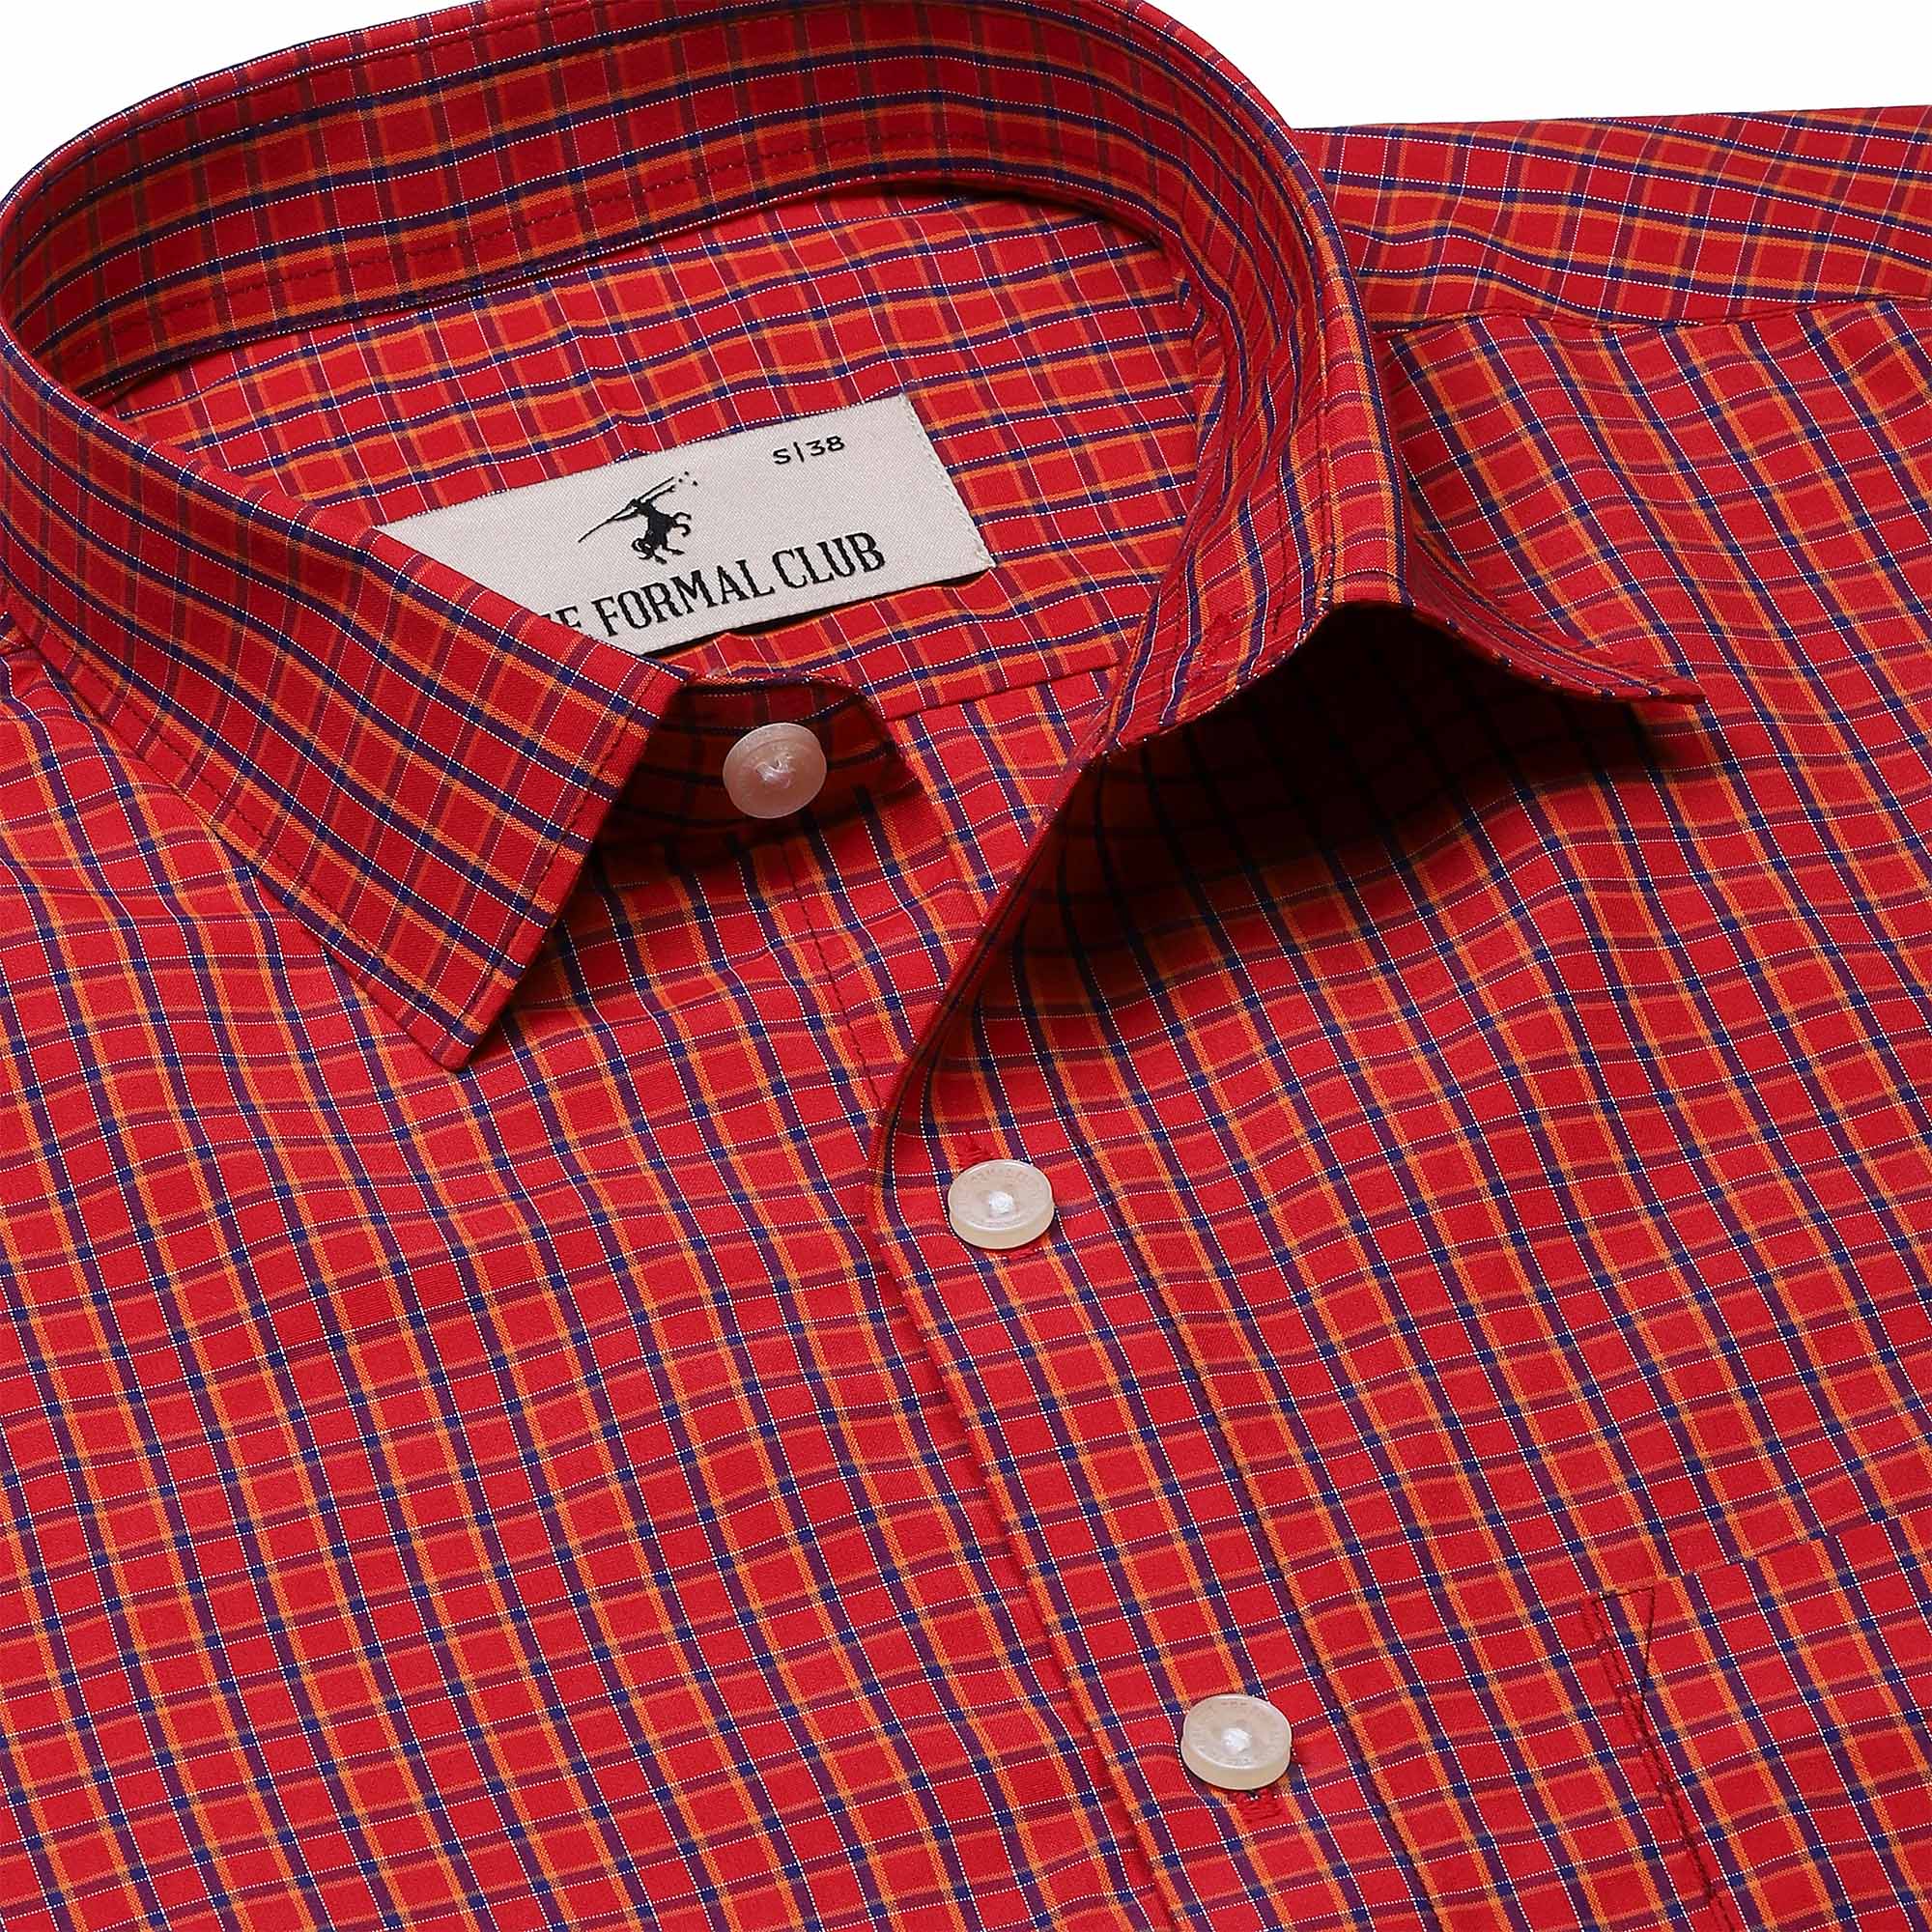 Checkmate Red Blue Check Shirt - The Formal Club